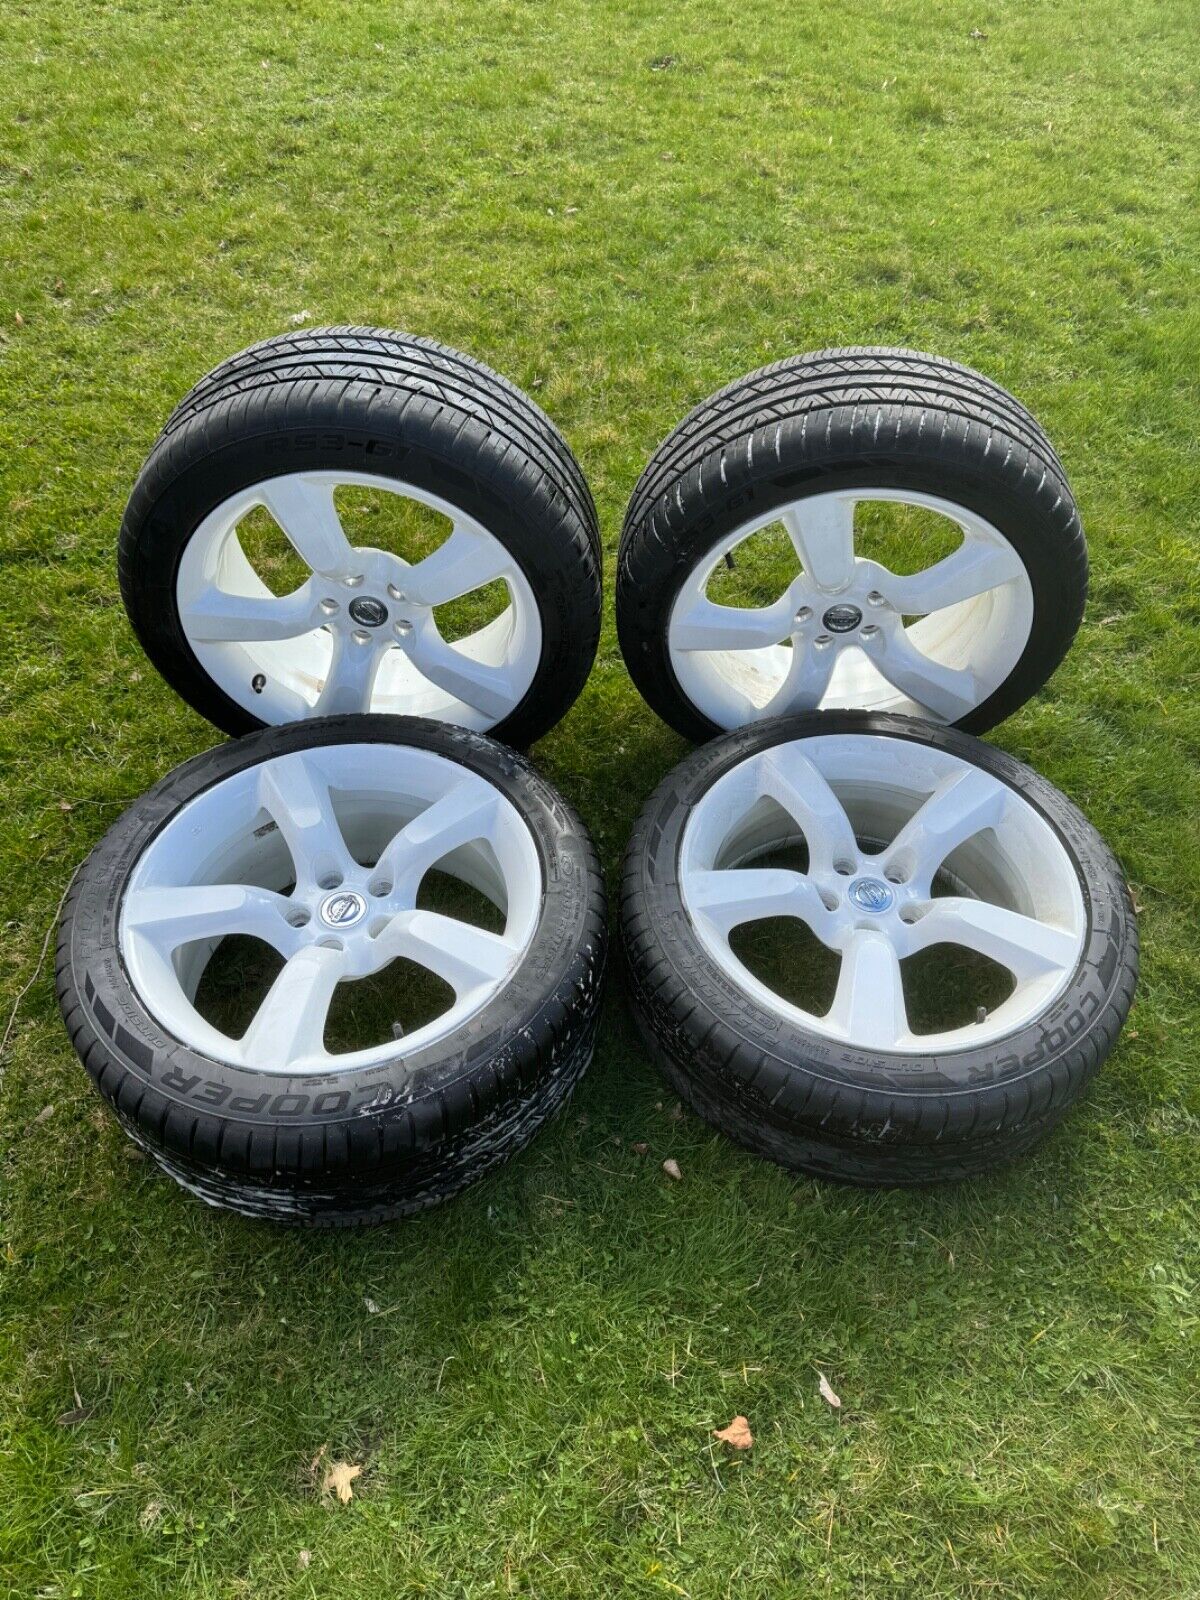 Nissan 350z OEM wheels (no tires), used good condition, 18” all around, 5-Lug